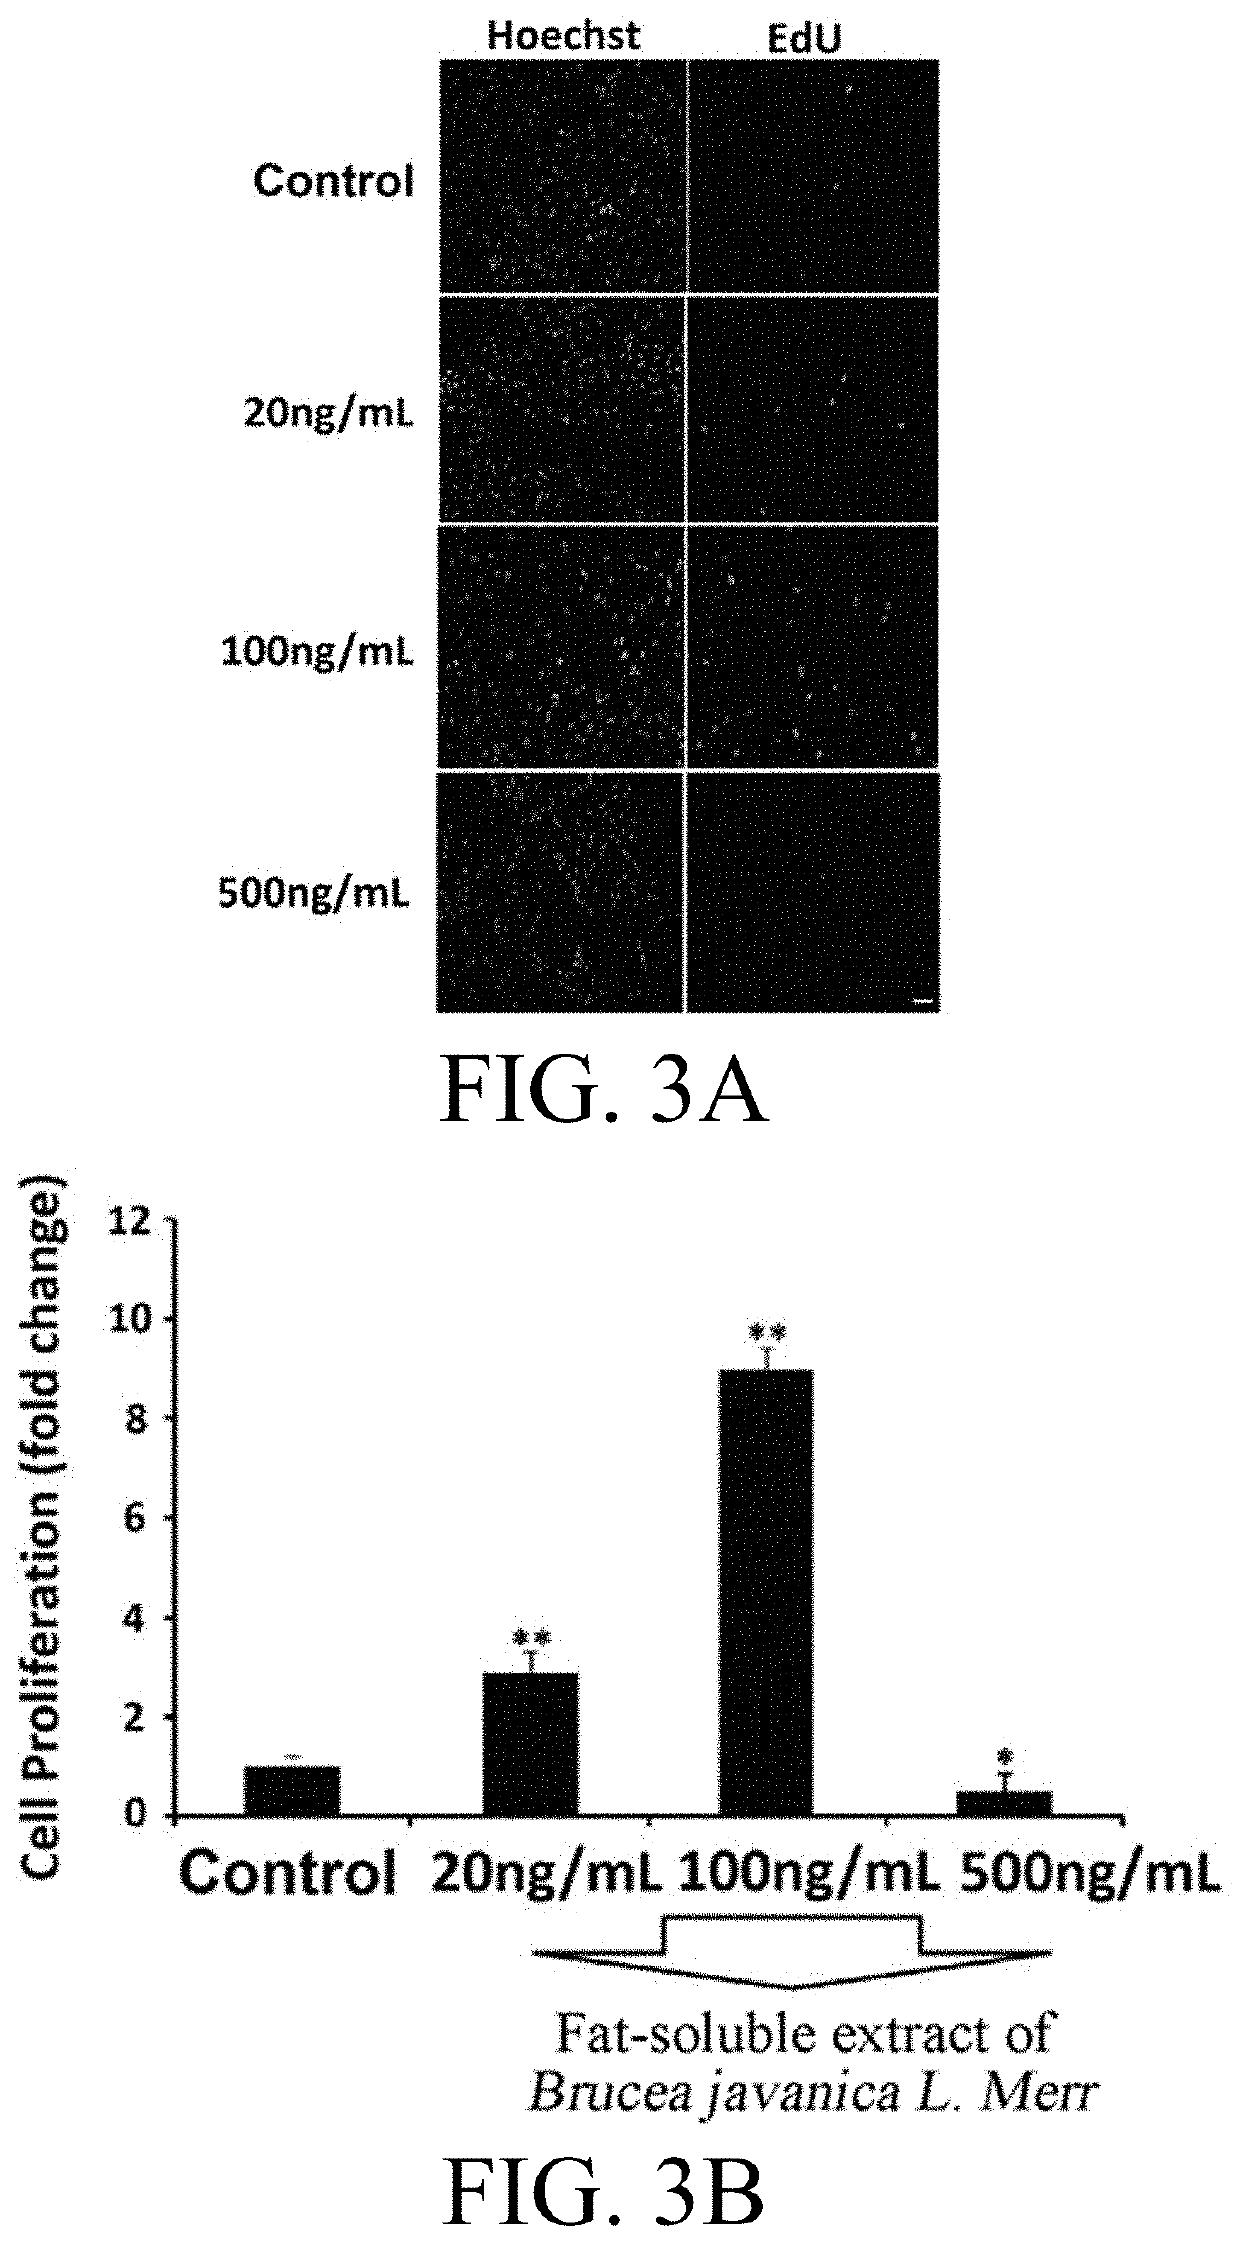 Use of fat-soluble extract of brucea javanica l. merr in preparing medicines for promoting peripheral nerve regeneration